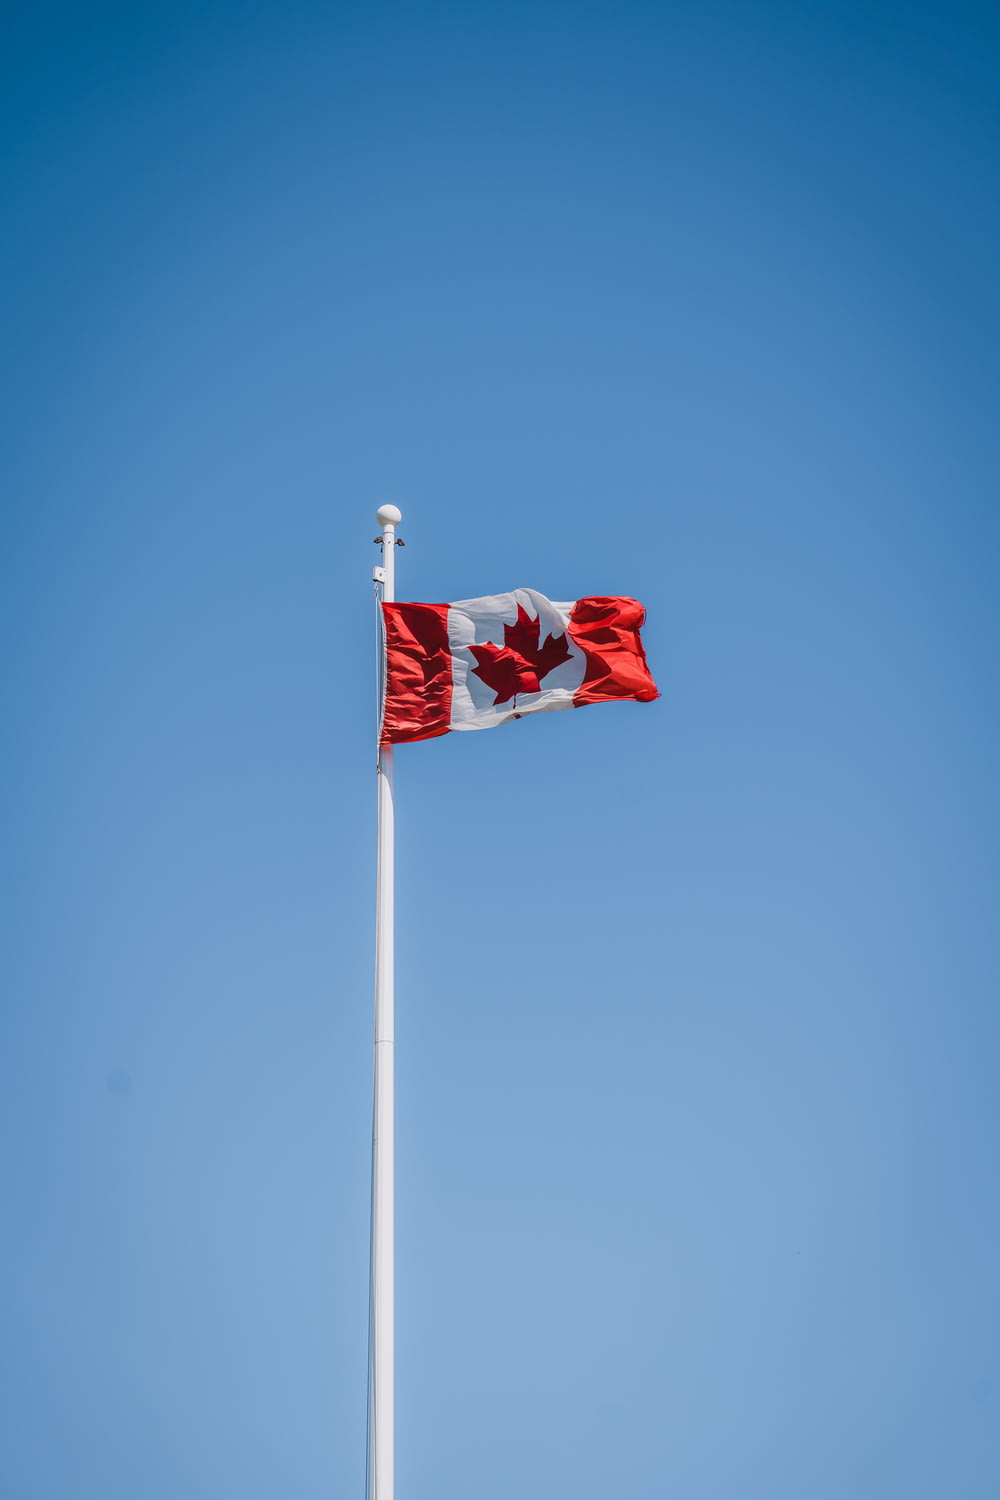 a canadian flag flying high in the sky